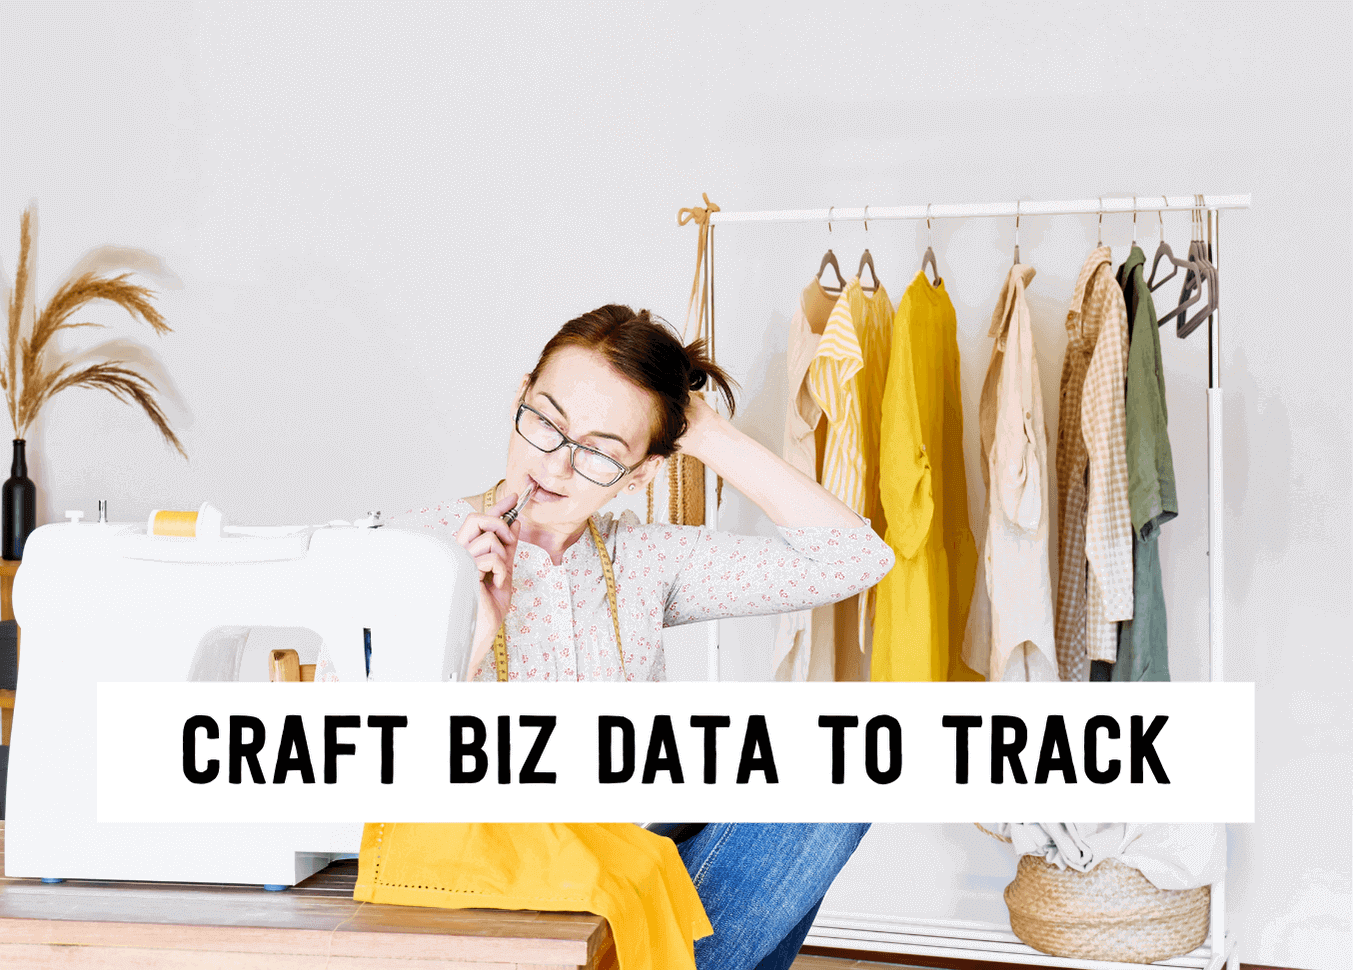 Craft biz data to track | Tizzit.co - start and grow a successful handmade business